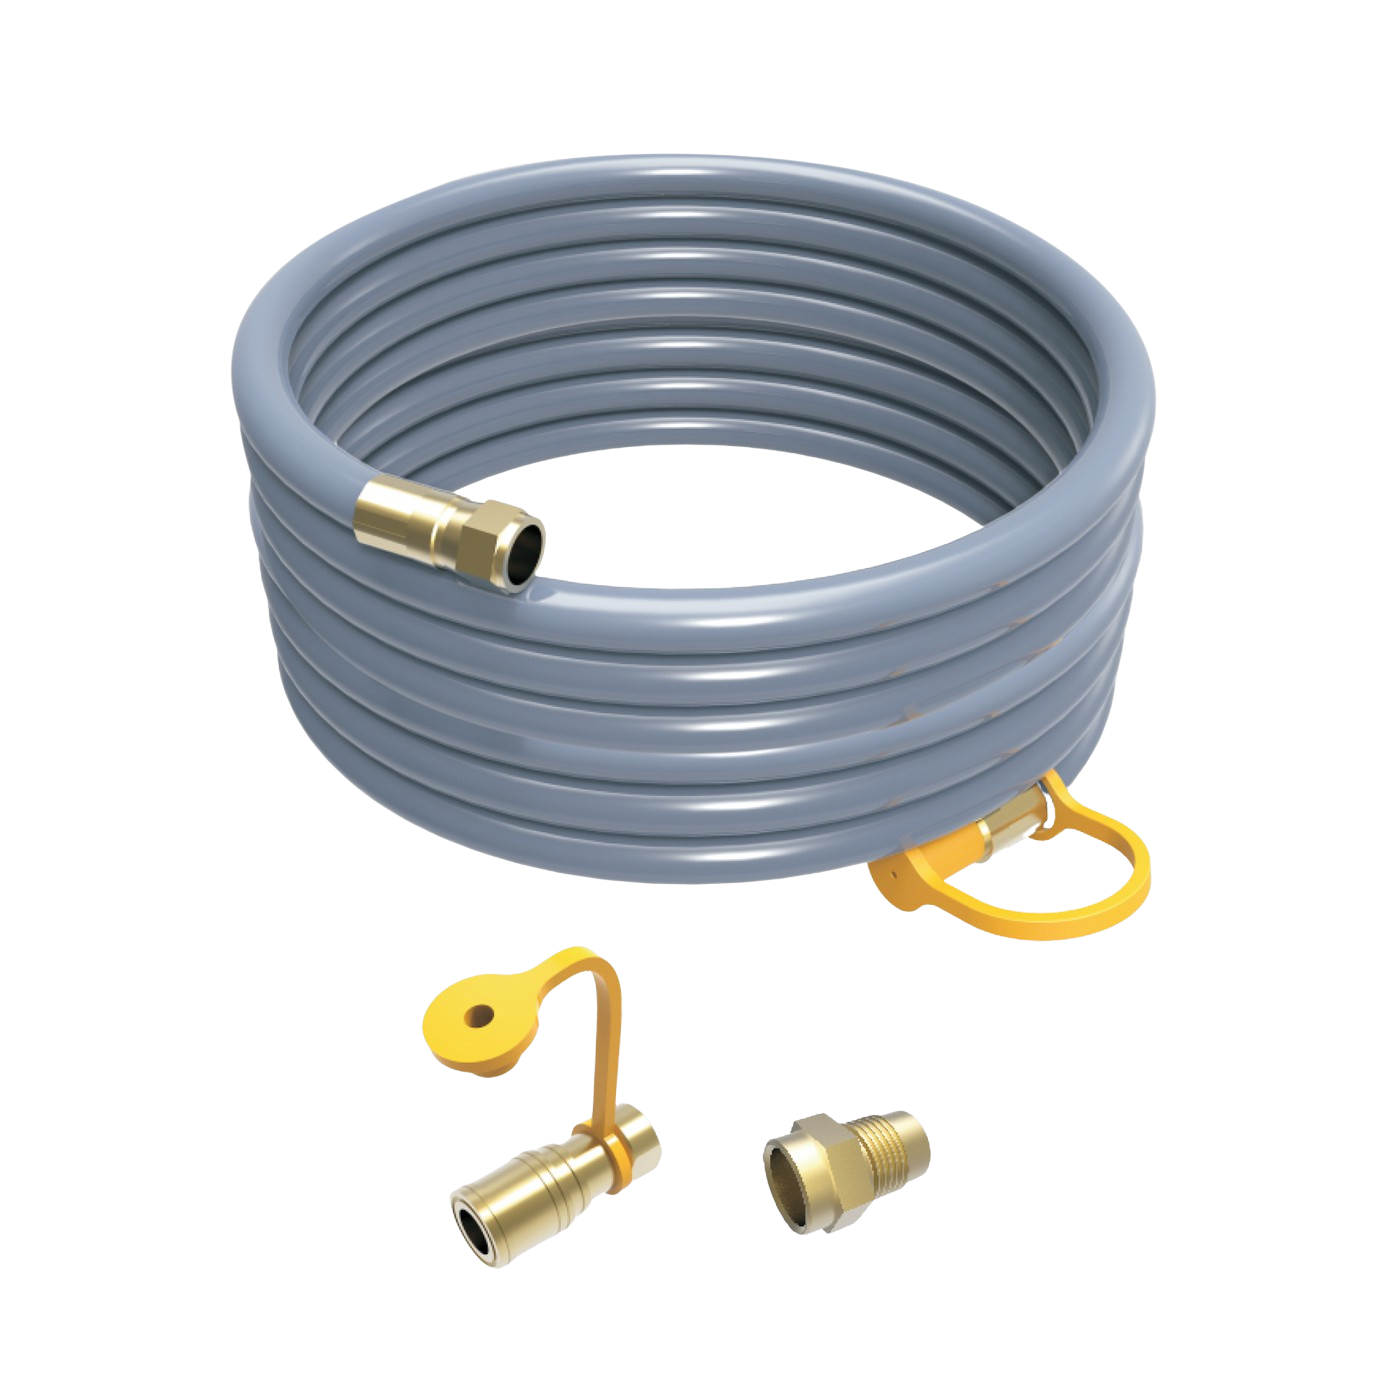 Firman, Firman 25' Natural Gas Hose With Storage Strap 1815 New